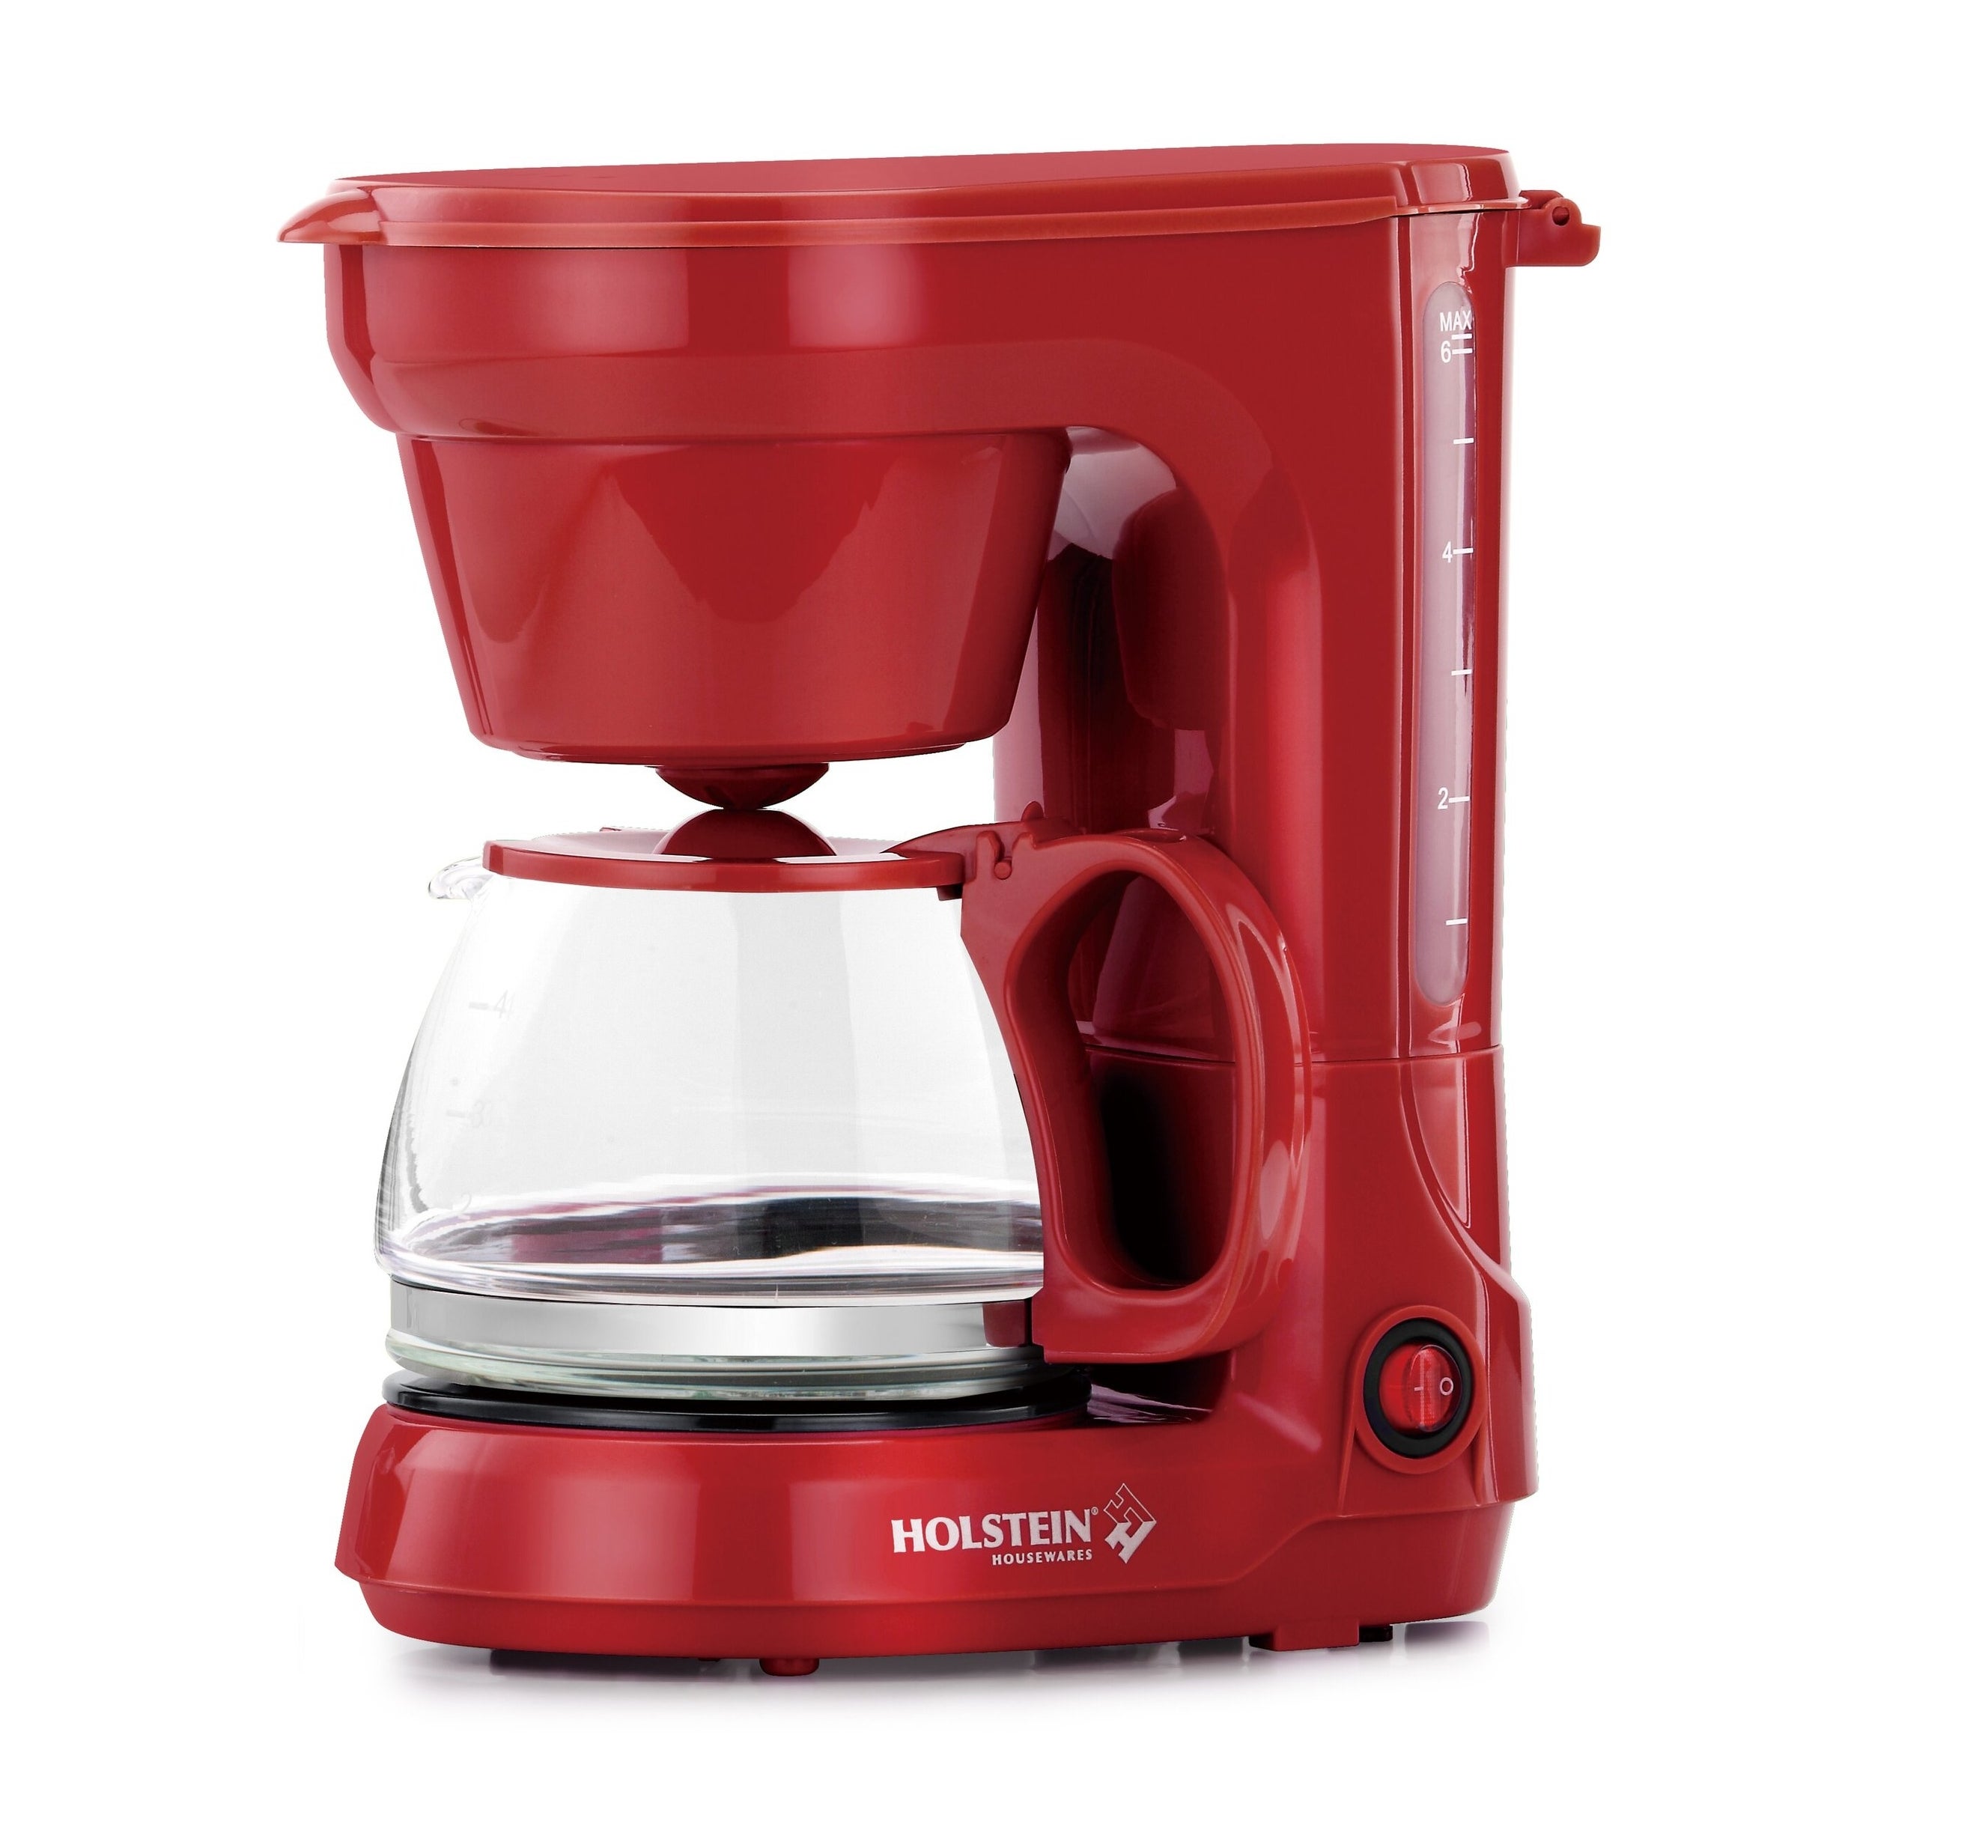 the red holstein 5 cup coffee maker